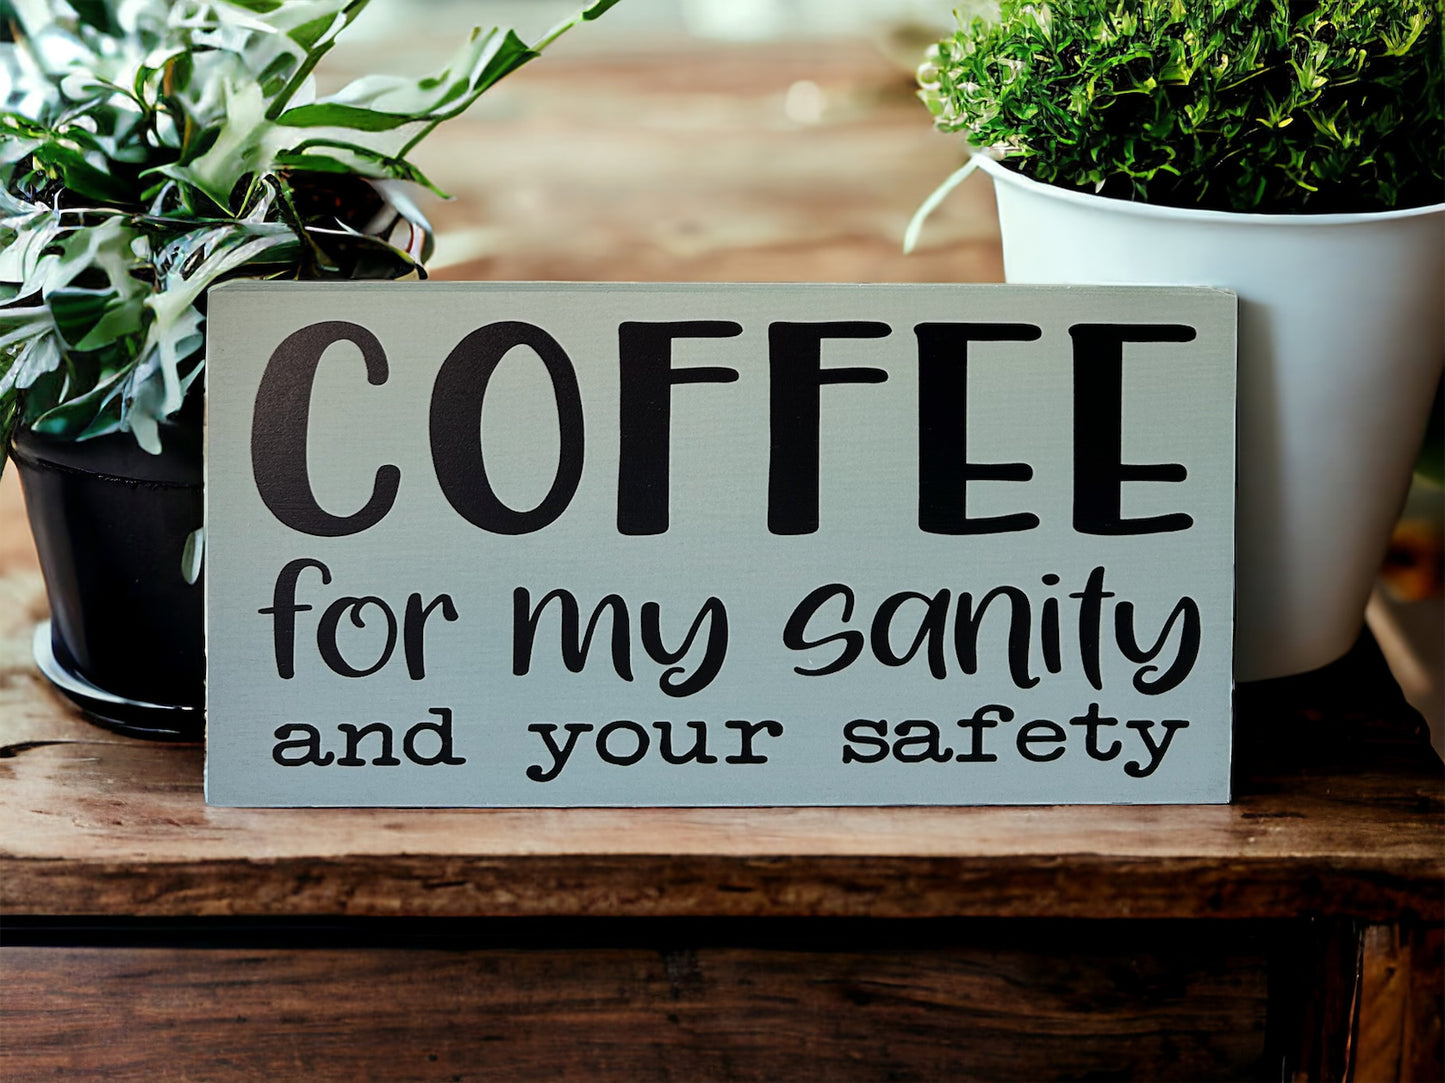 Coffee for my Sanity - Funny Rustic Wood Sign